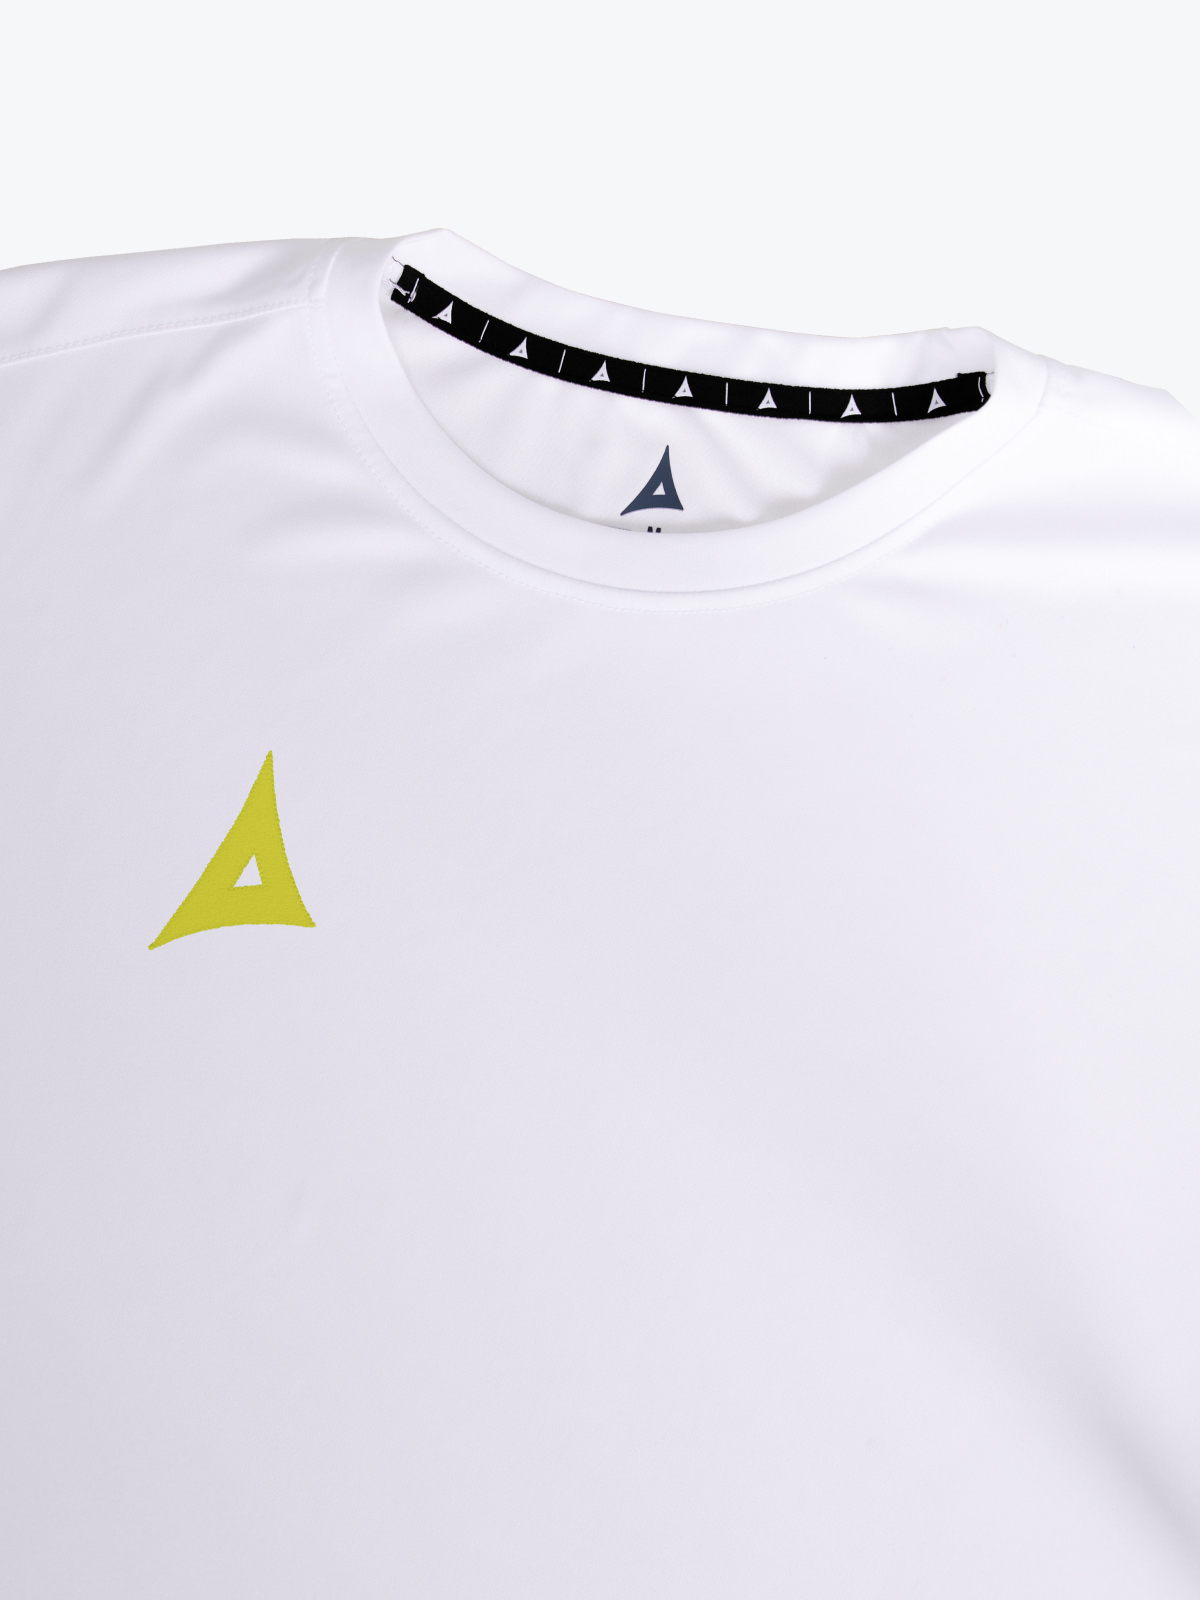 picture of focus 2 classic jersey - white/yellow